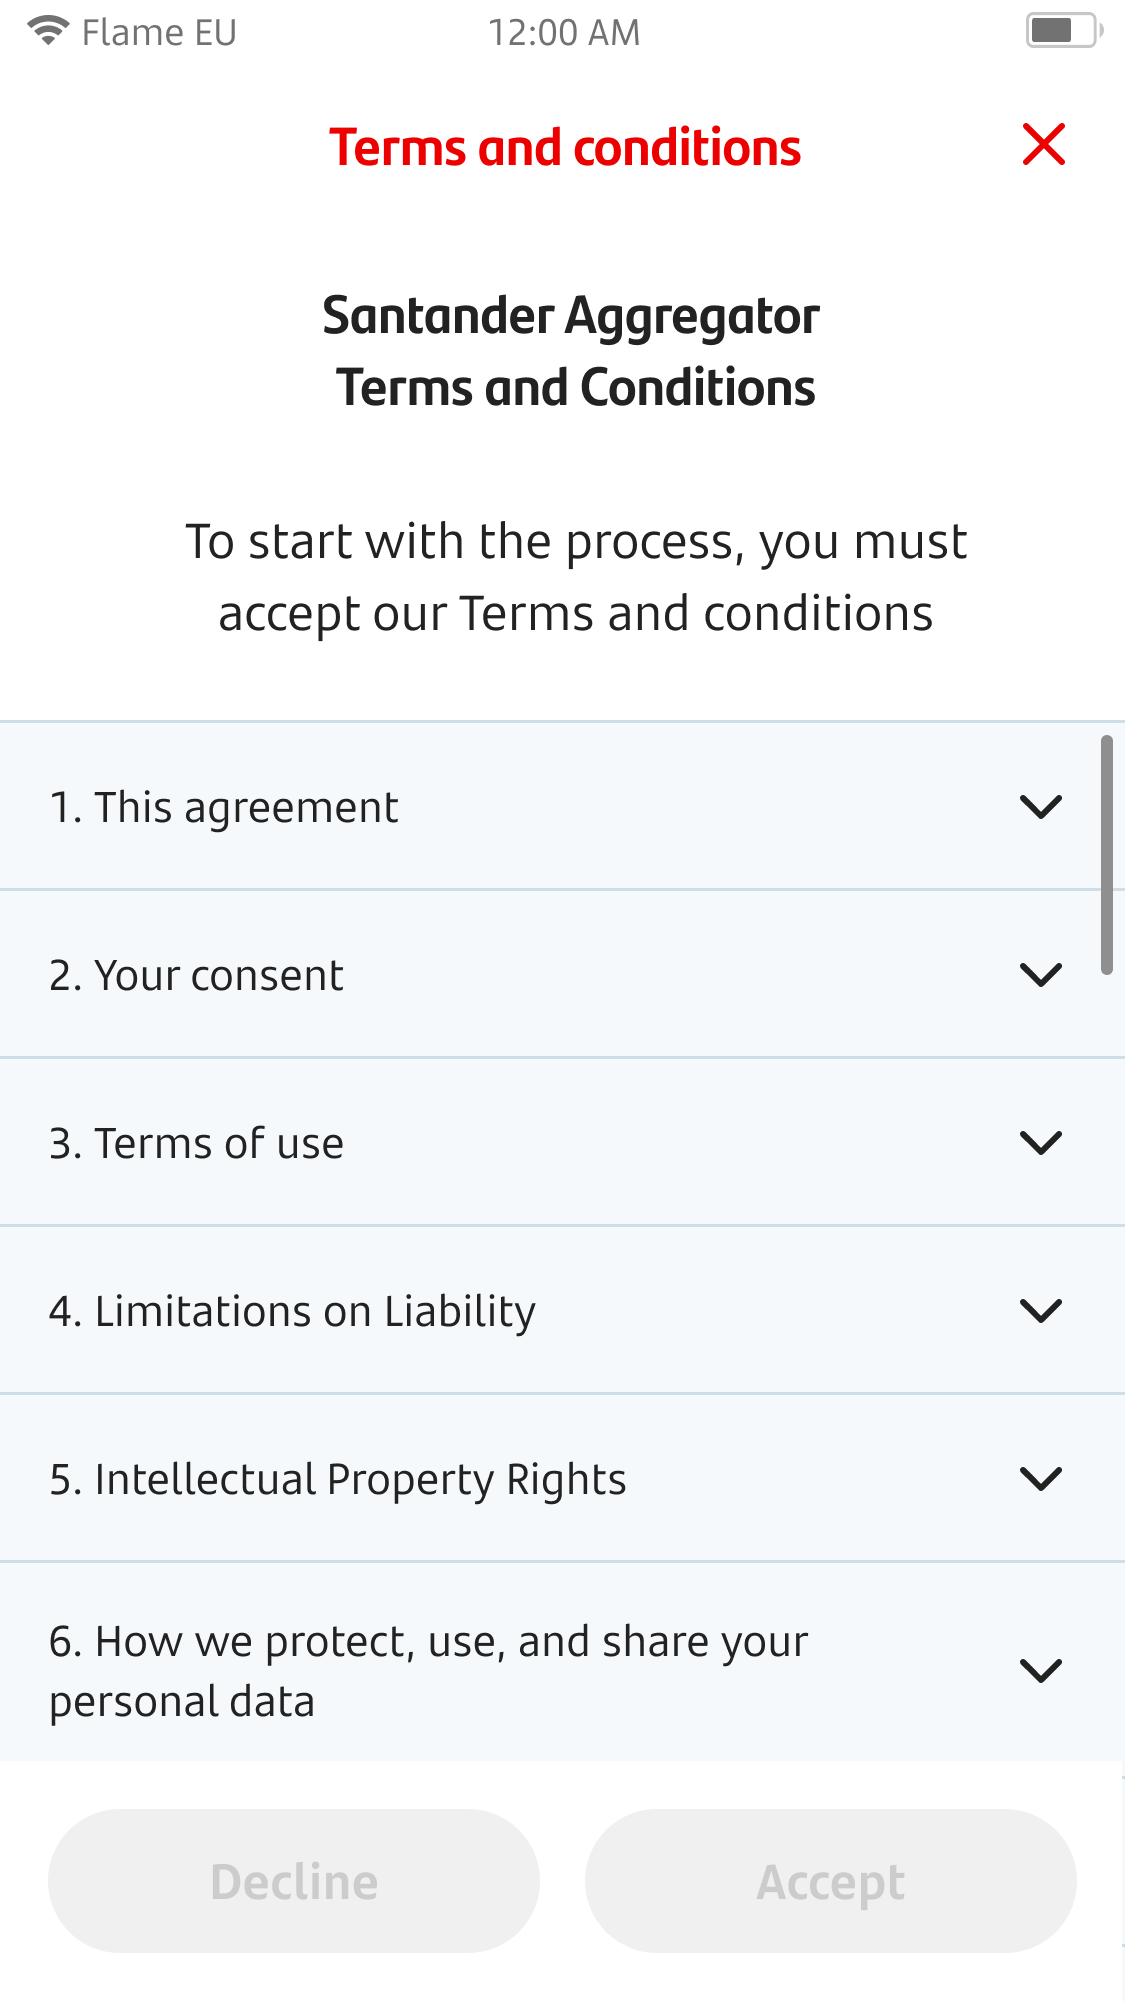 Terms and conditions for Santander Aggregator.